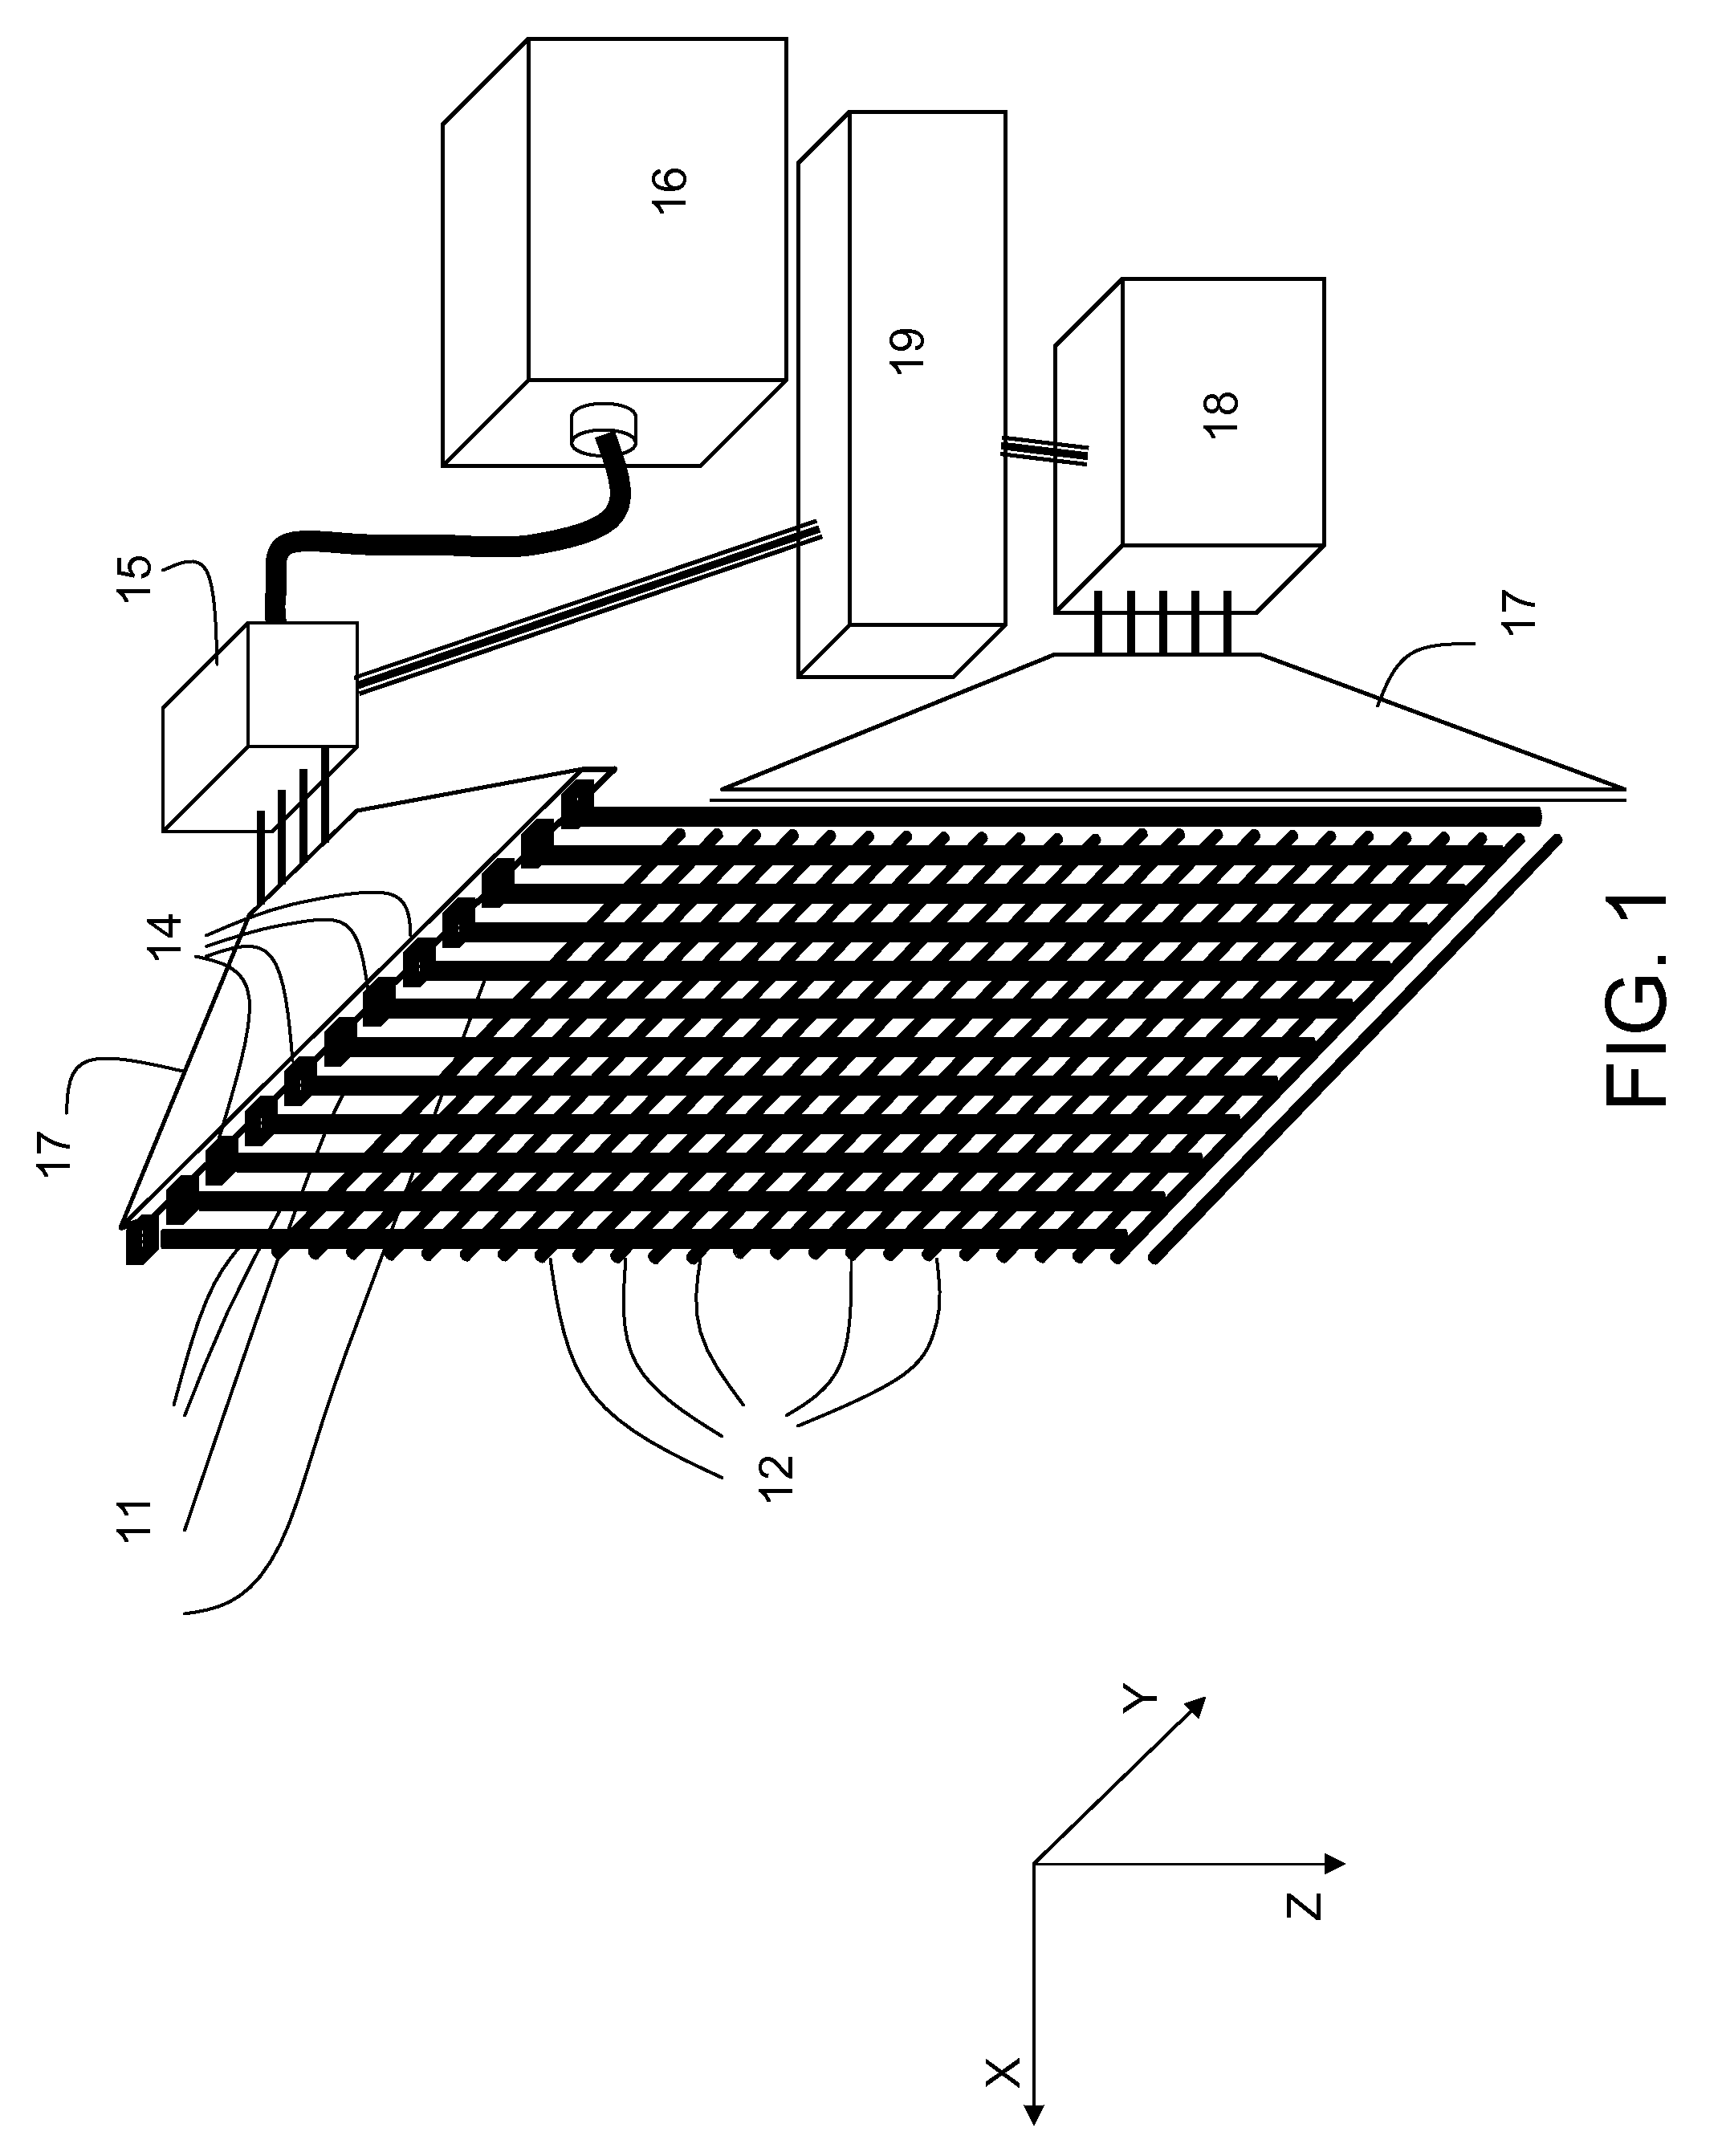 System and method for fiber optics based direct view giant screen flat panel display